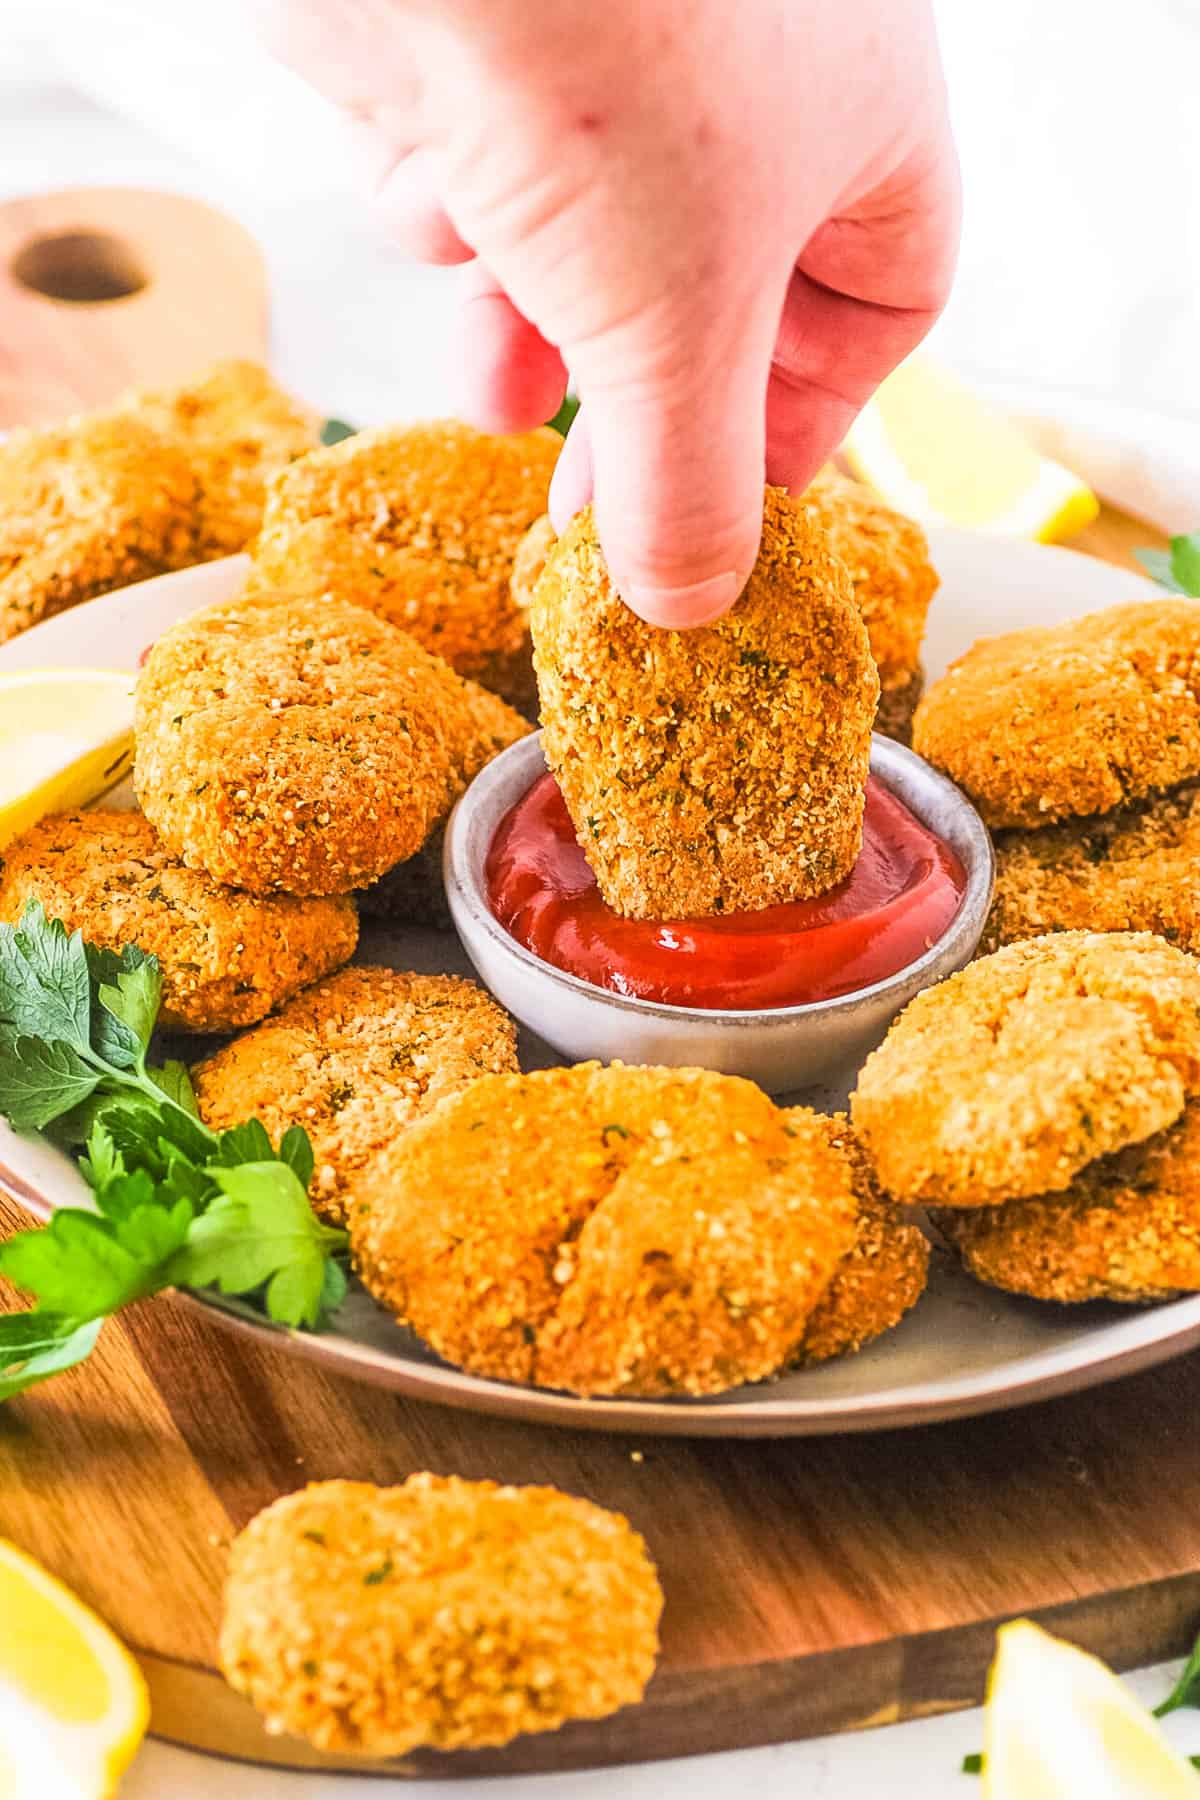 Vegan gluten free chicken nuggets being dipped into ketchup.